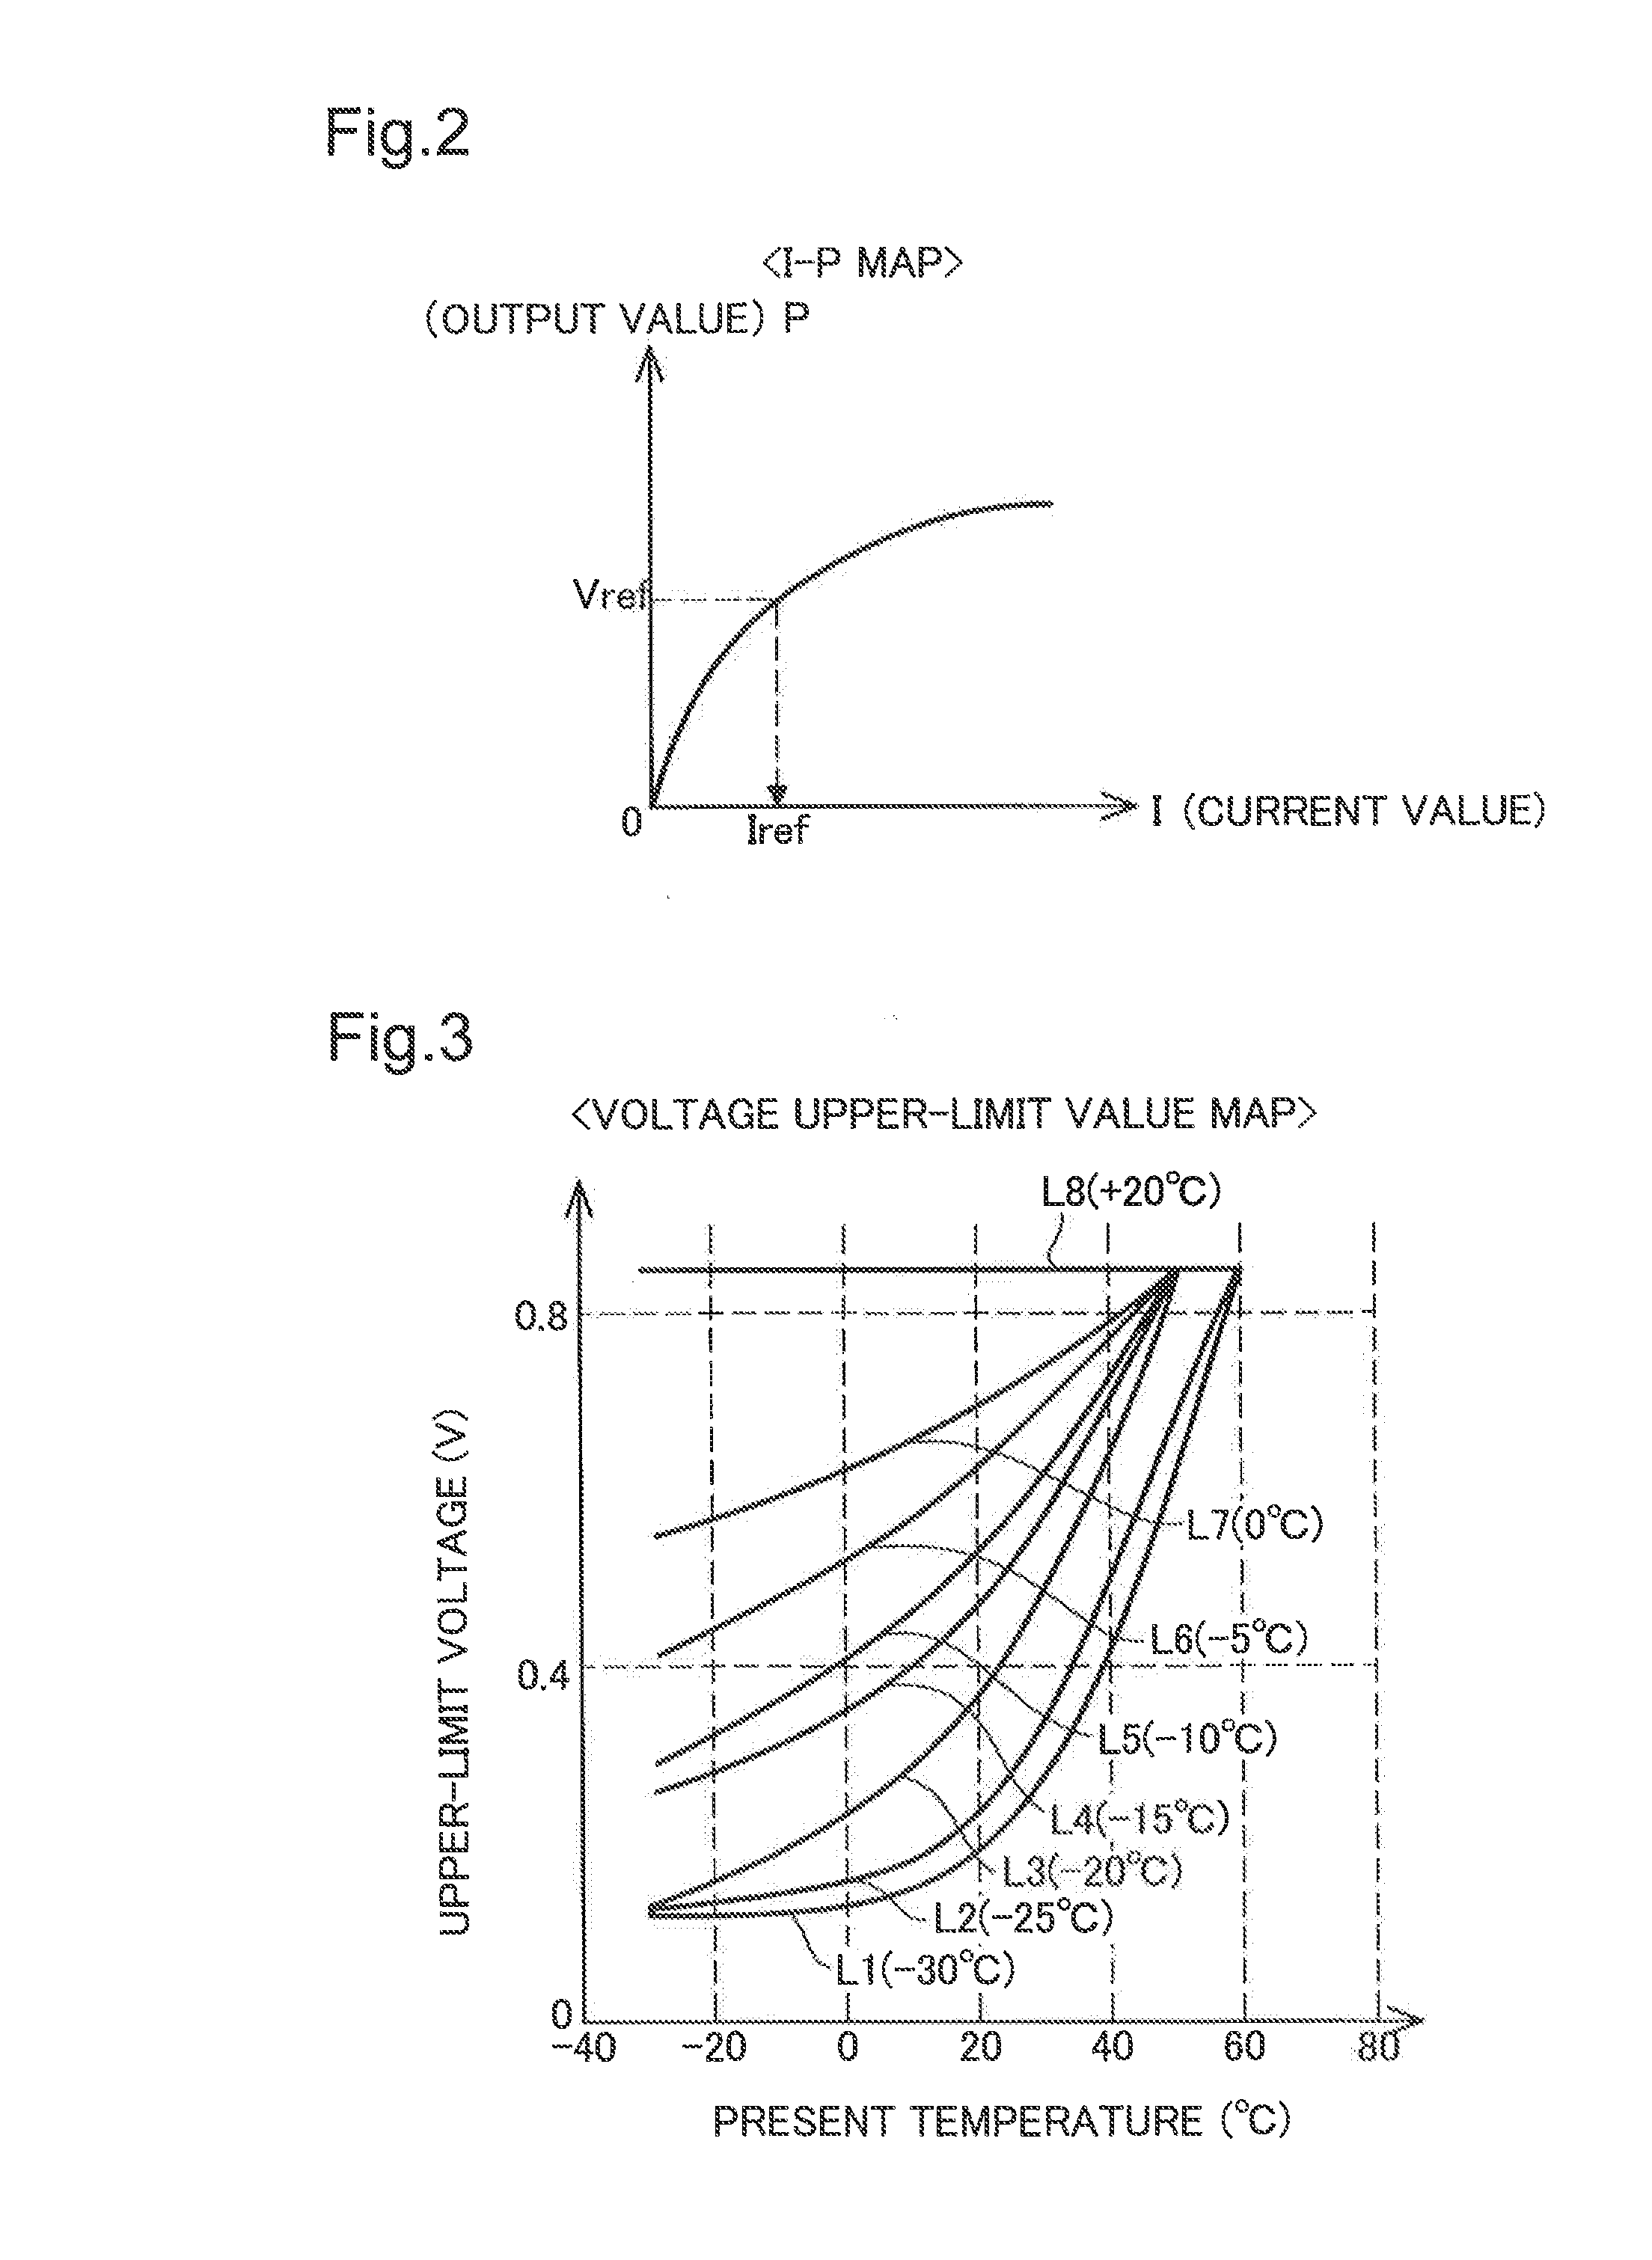 Operation control method of fuel cell and operation control apparatus of fuel cell